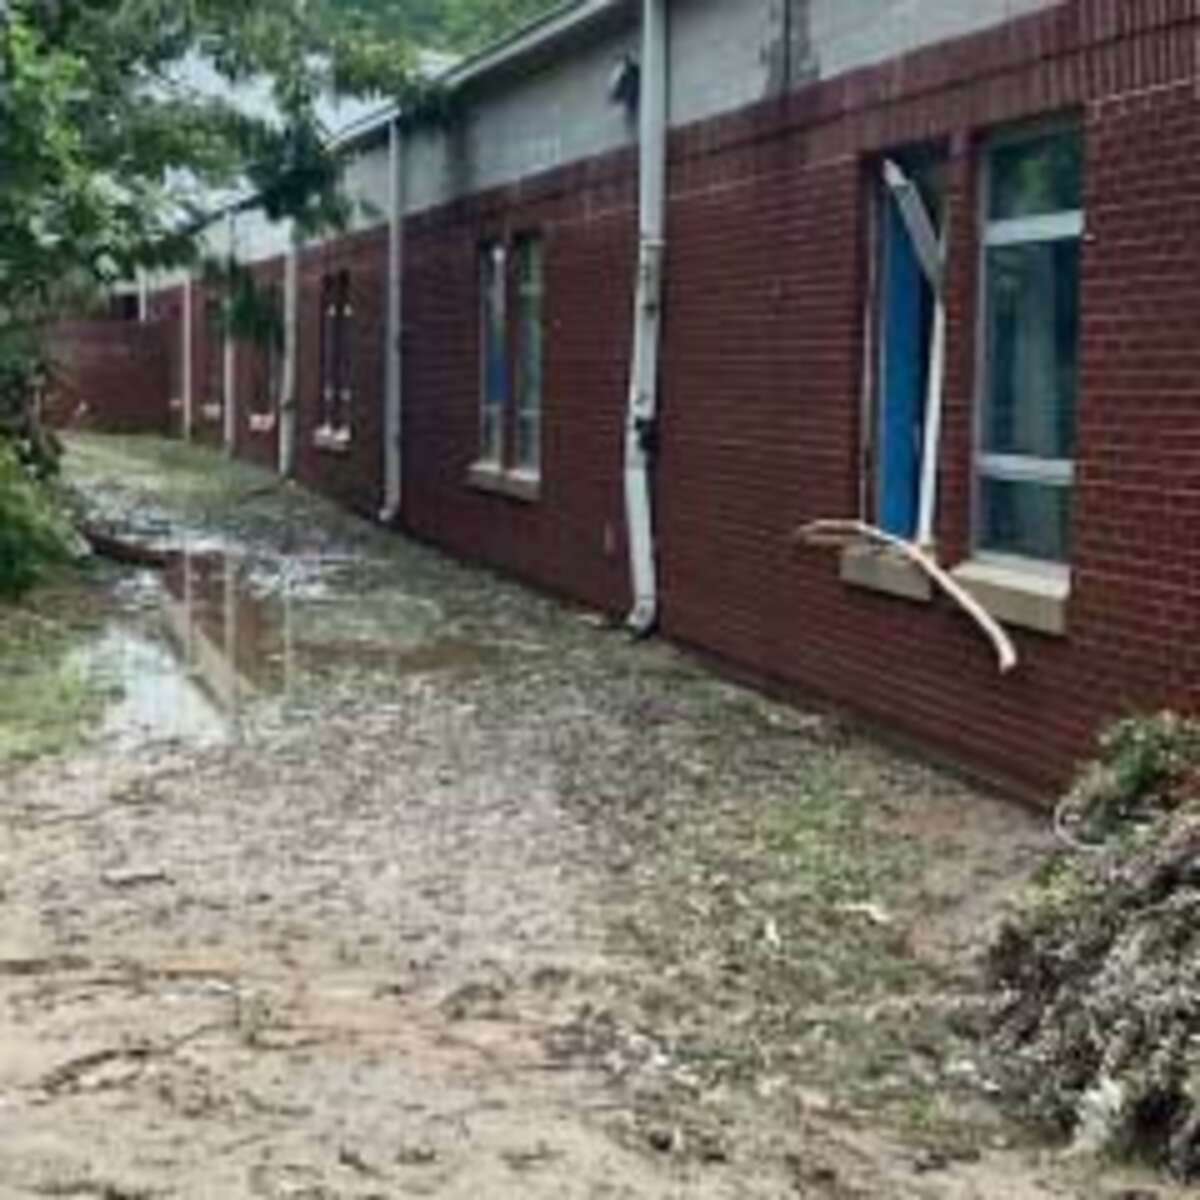 Flood waters from the Kentucky floods are rising up against a red brick building. 